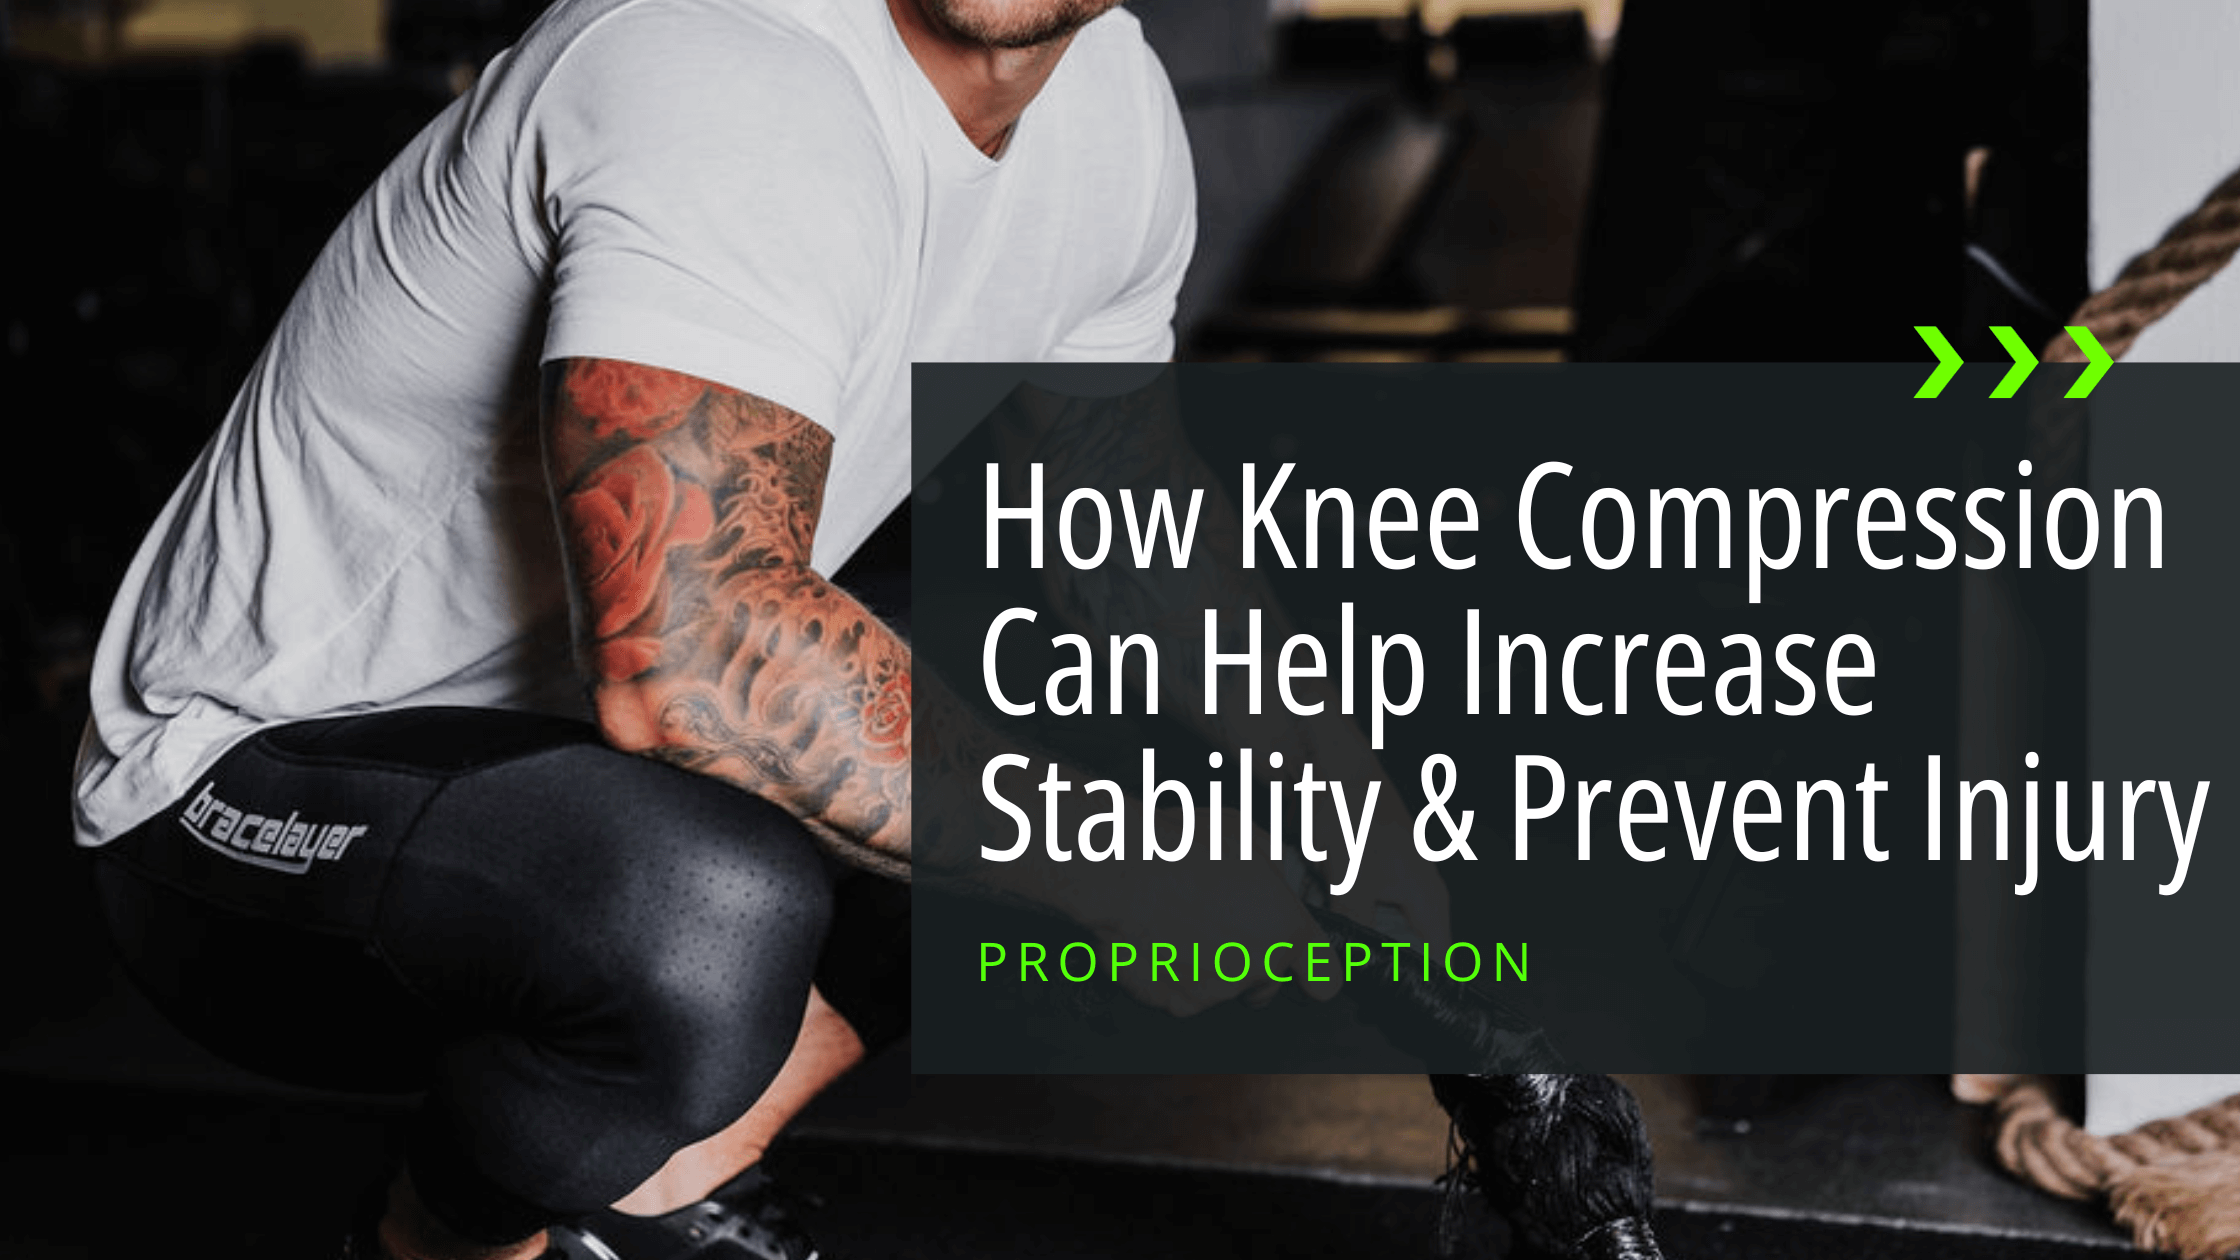 Blog banner for How Knee Compression Can Increase Stability & Prevent Injury showing a close up of a person crouching wearing Bracelayer Pants and the title. Knee Compression, Knee Instability, Knee Sleeves Bracelayer® USA | Knee Compression Gear